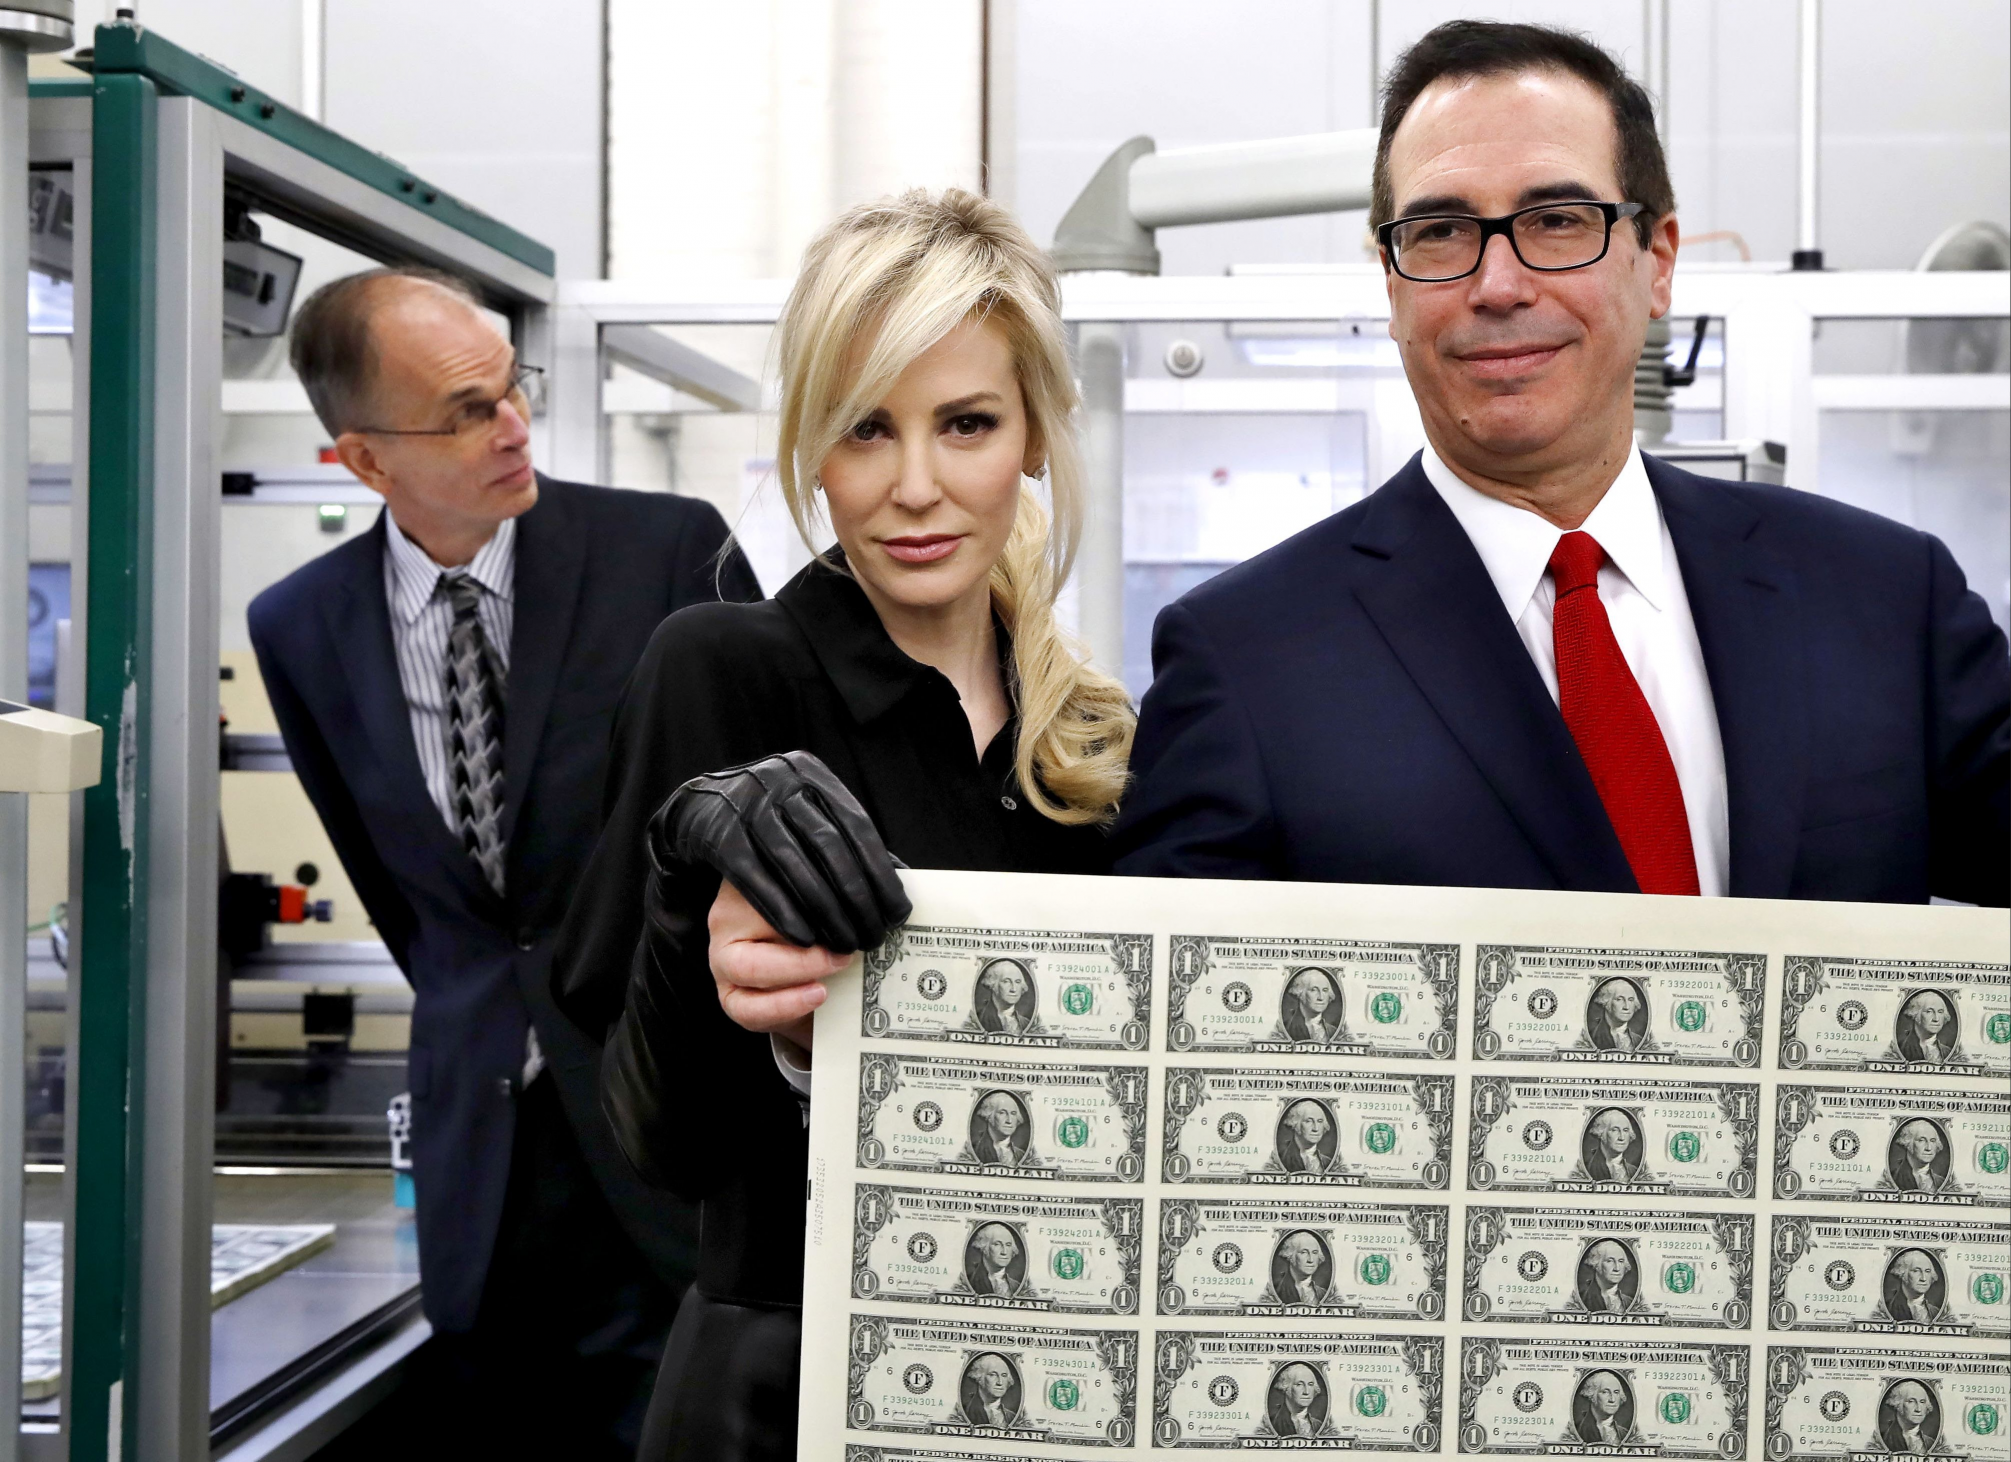 High Quality Louise Linton And Steve Mnuchin At Treasury with sheet of Money Blank Meme Template